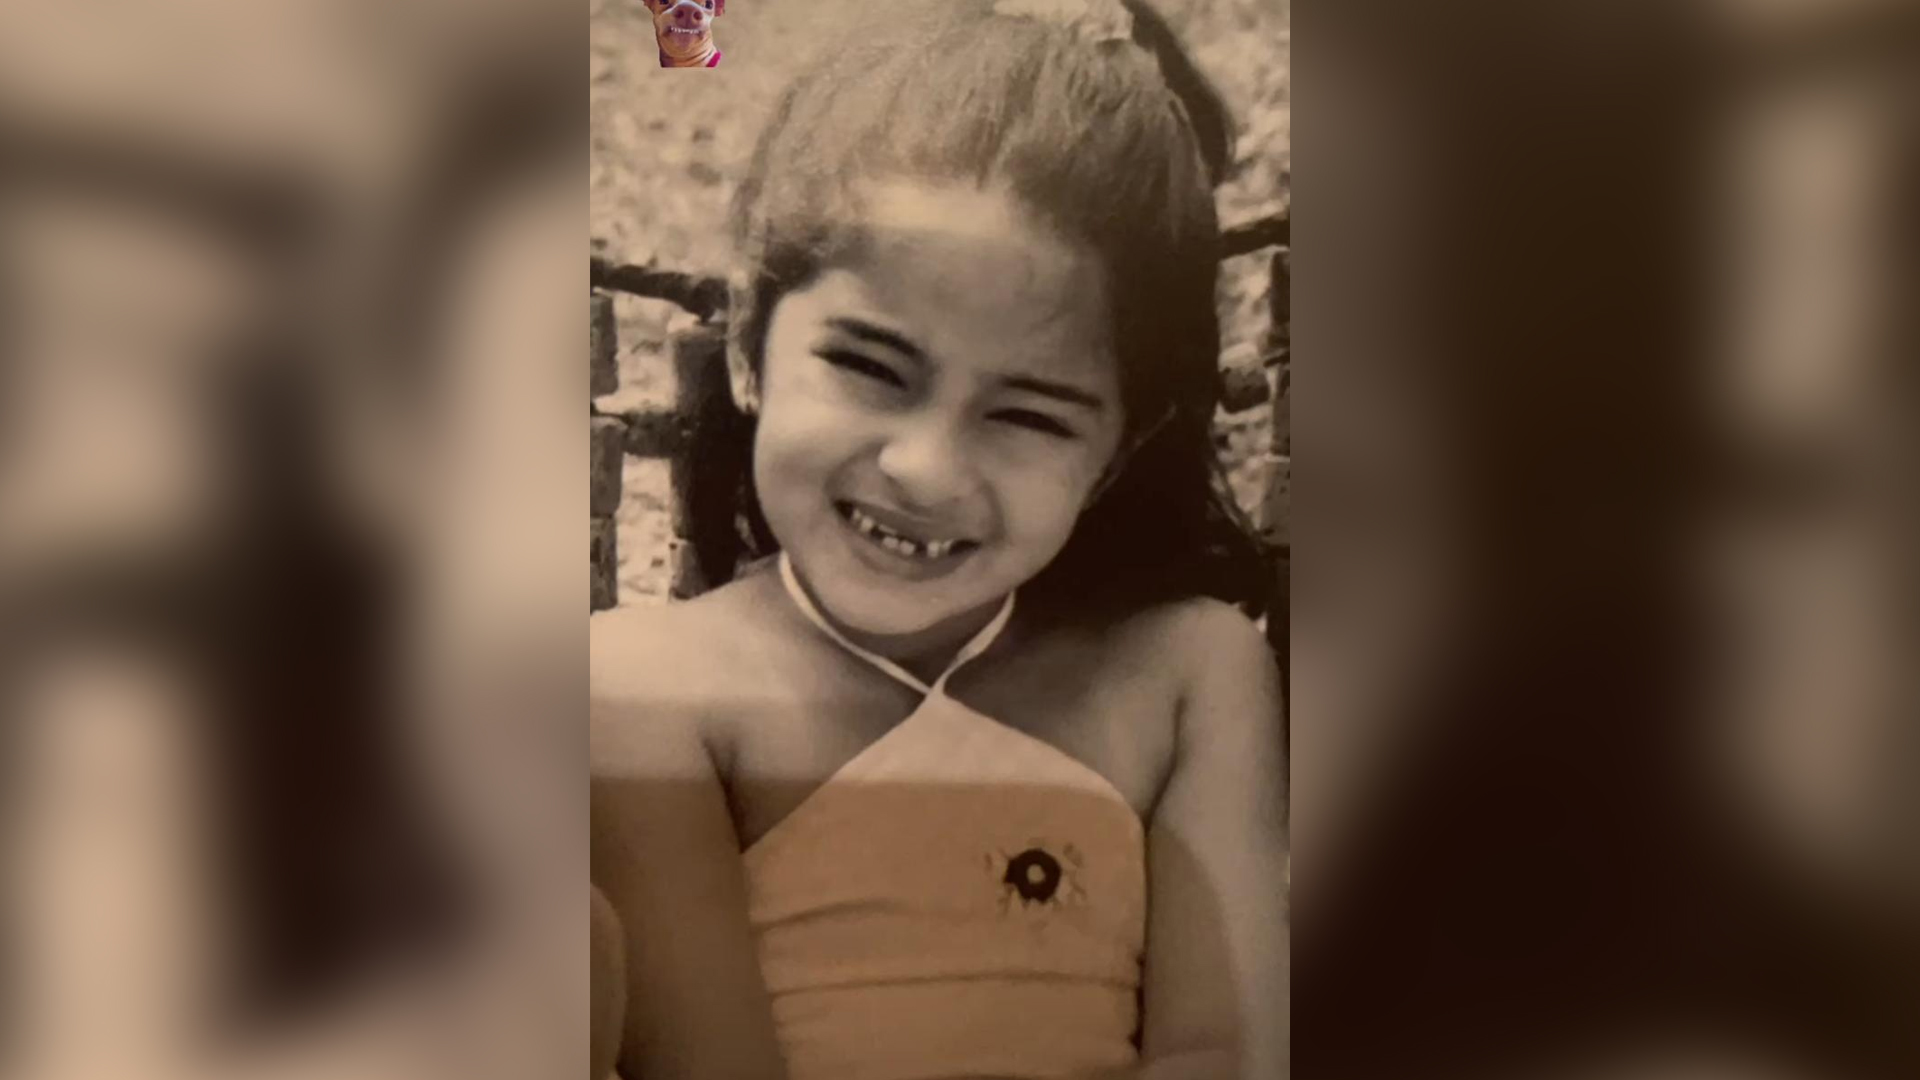 Actress shares a super adorable picture from childhood, can you guess who she is?